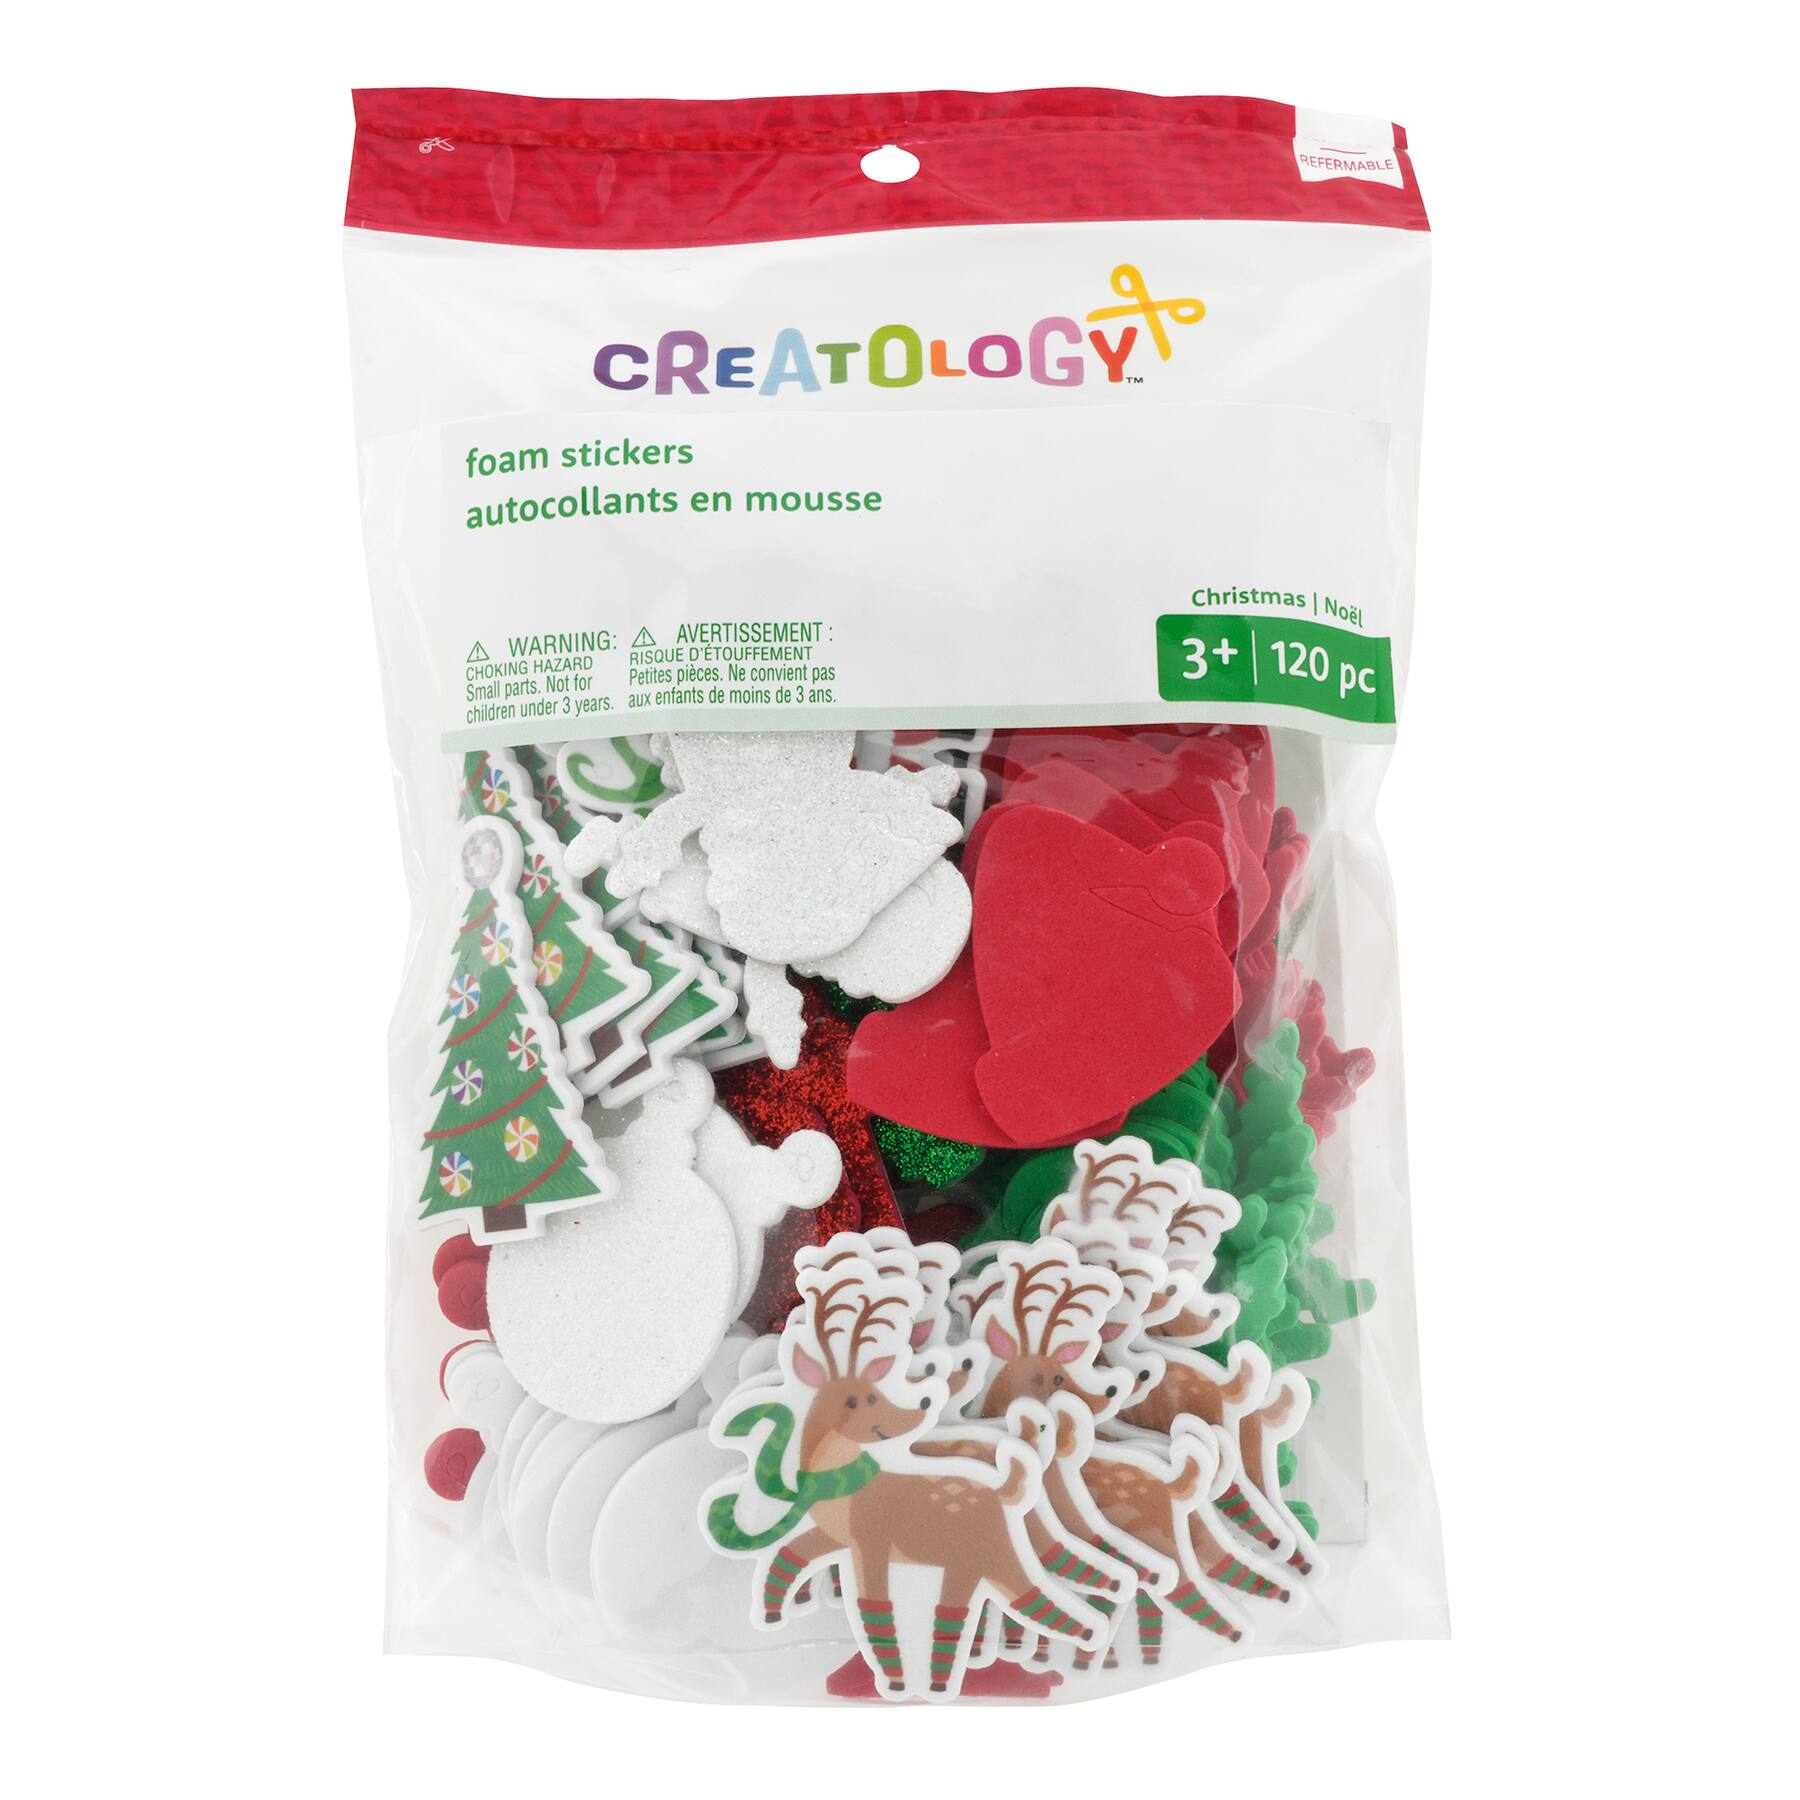 Winter Christmas Foam Stickers, 120ct. by Creatology™